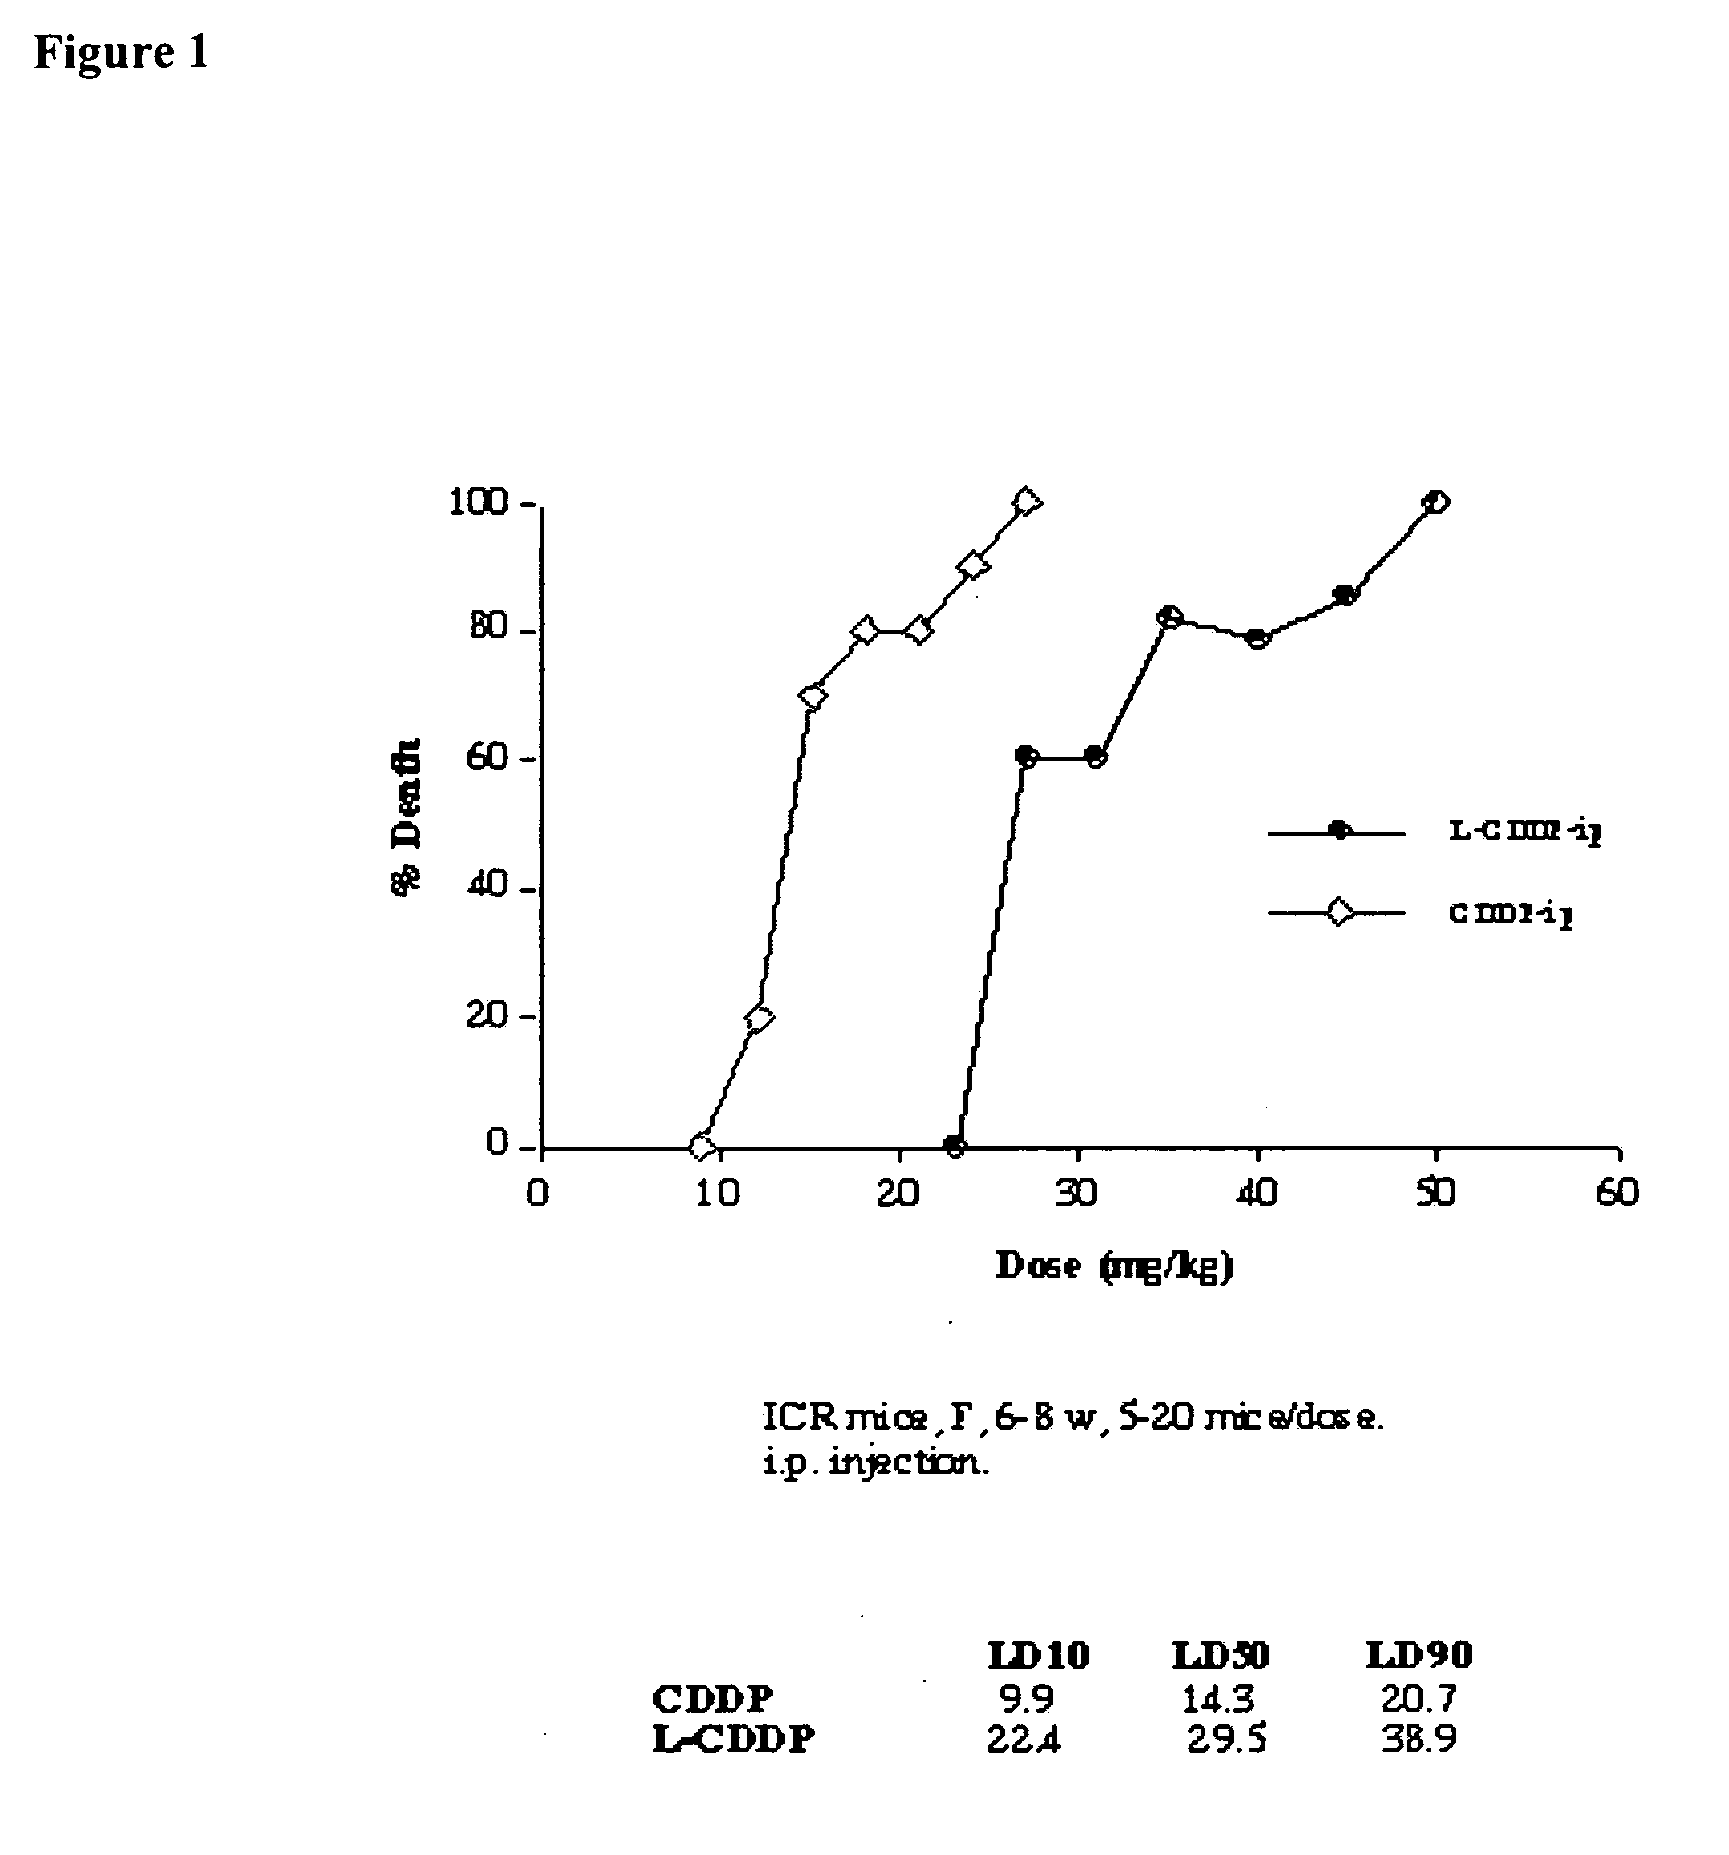 Methods of treating cancer with lipid-based platinum compound formulations administered intraperitoneally